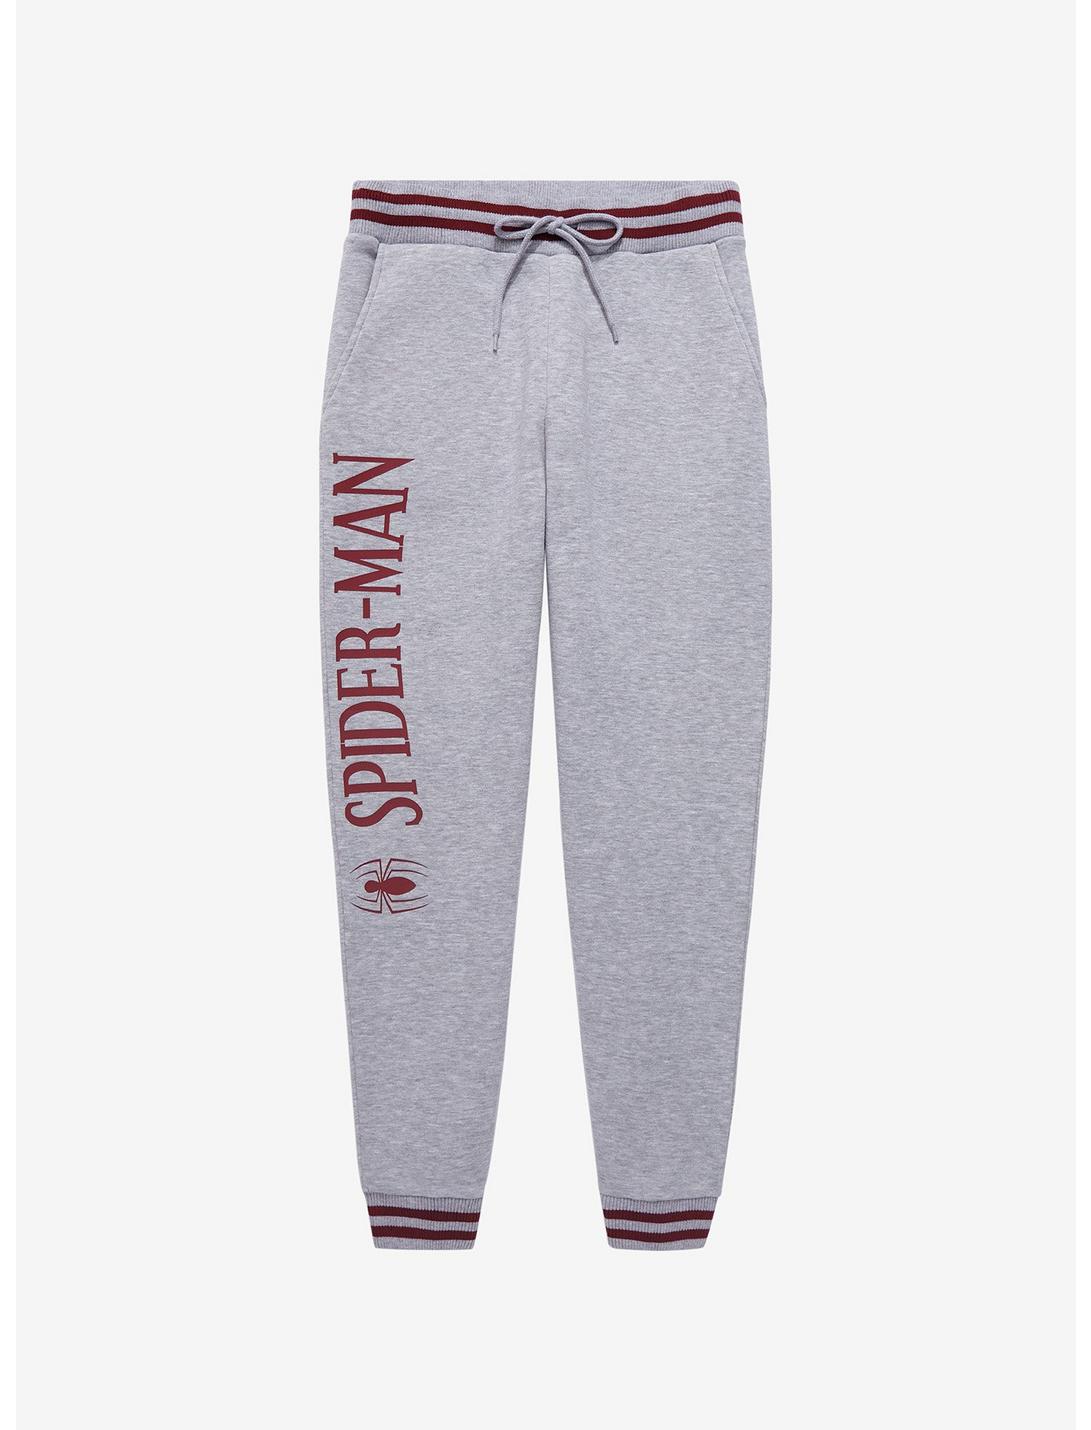 Marvel Spider-Man Striped Joggers - BoxLunch Exclusive, HEATHER GREY, hi-res